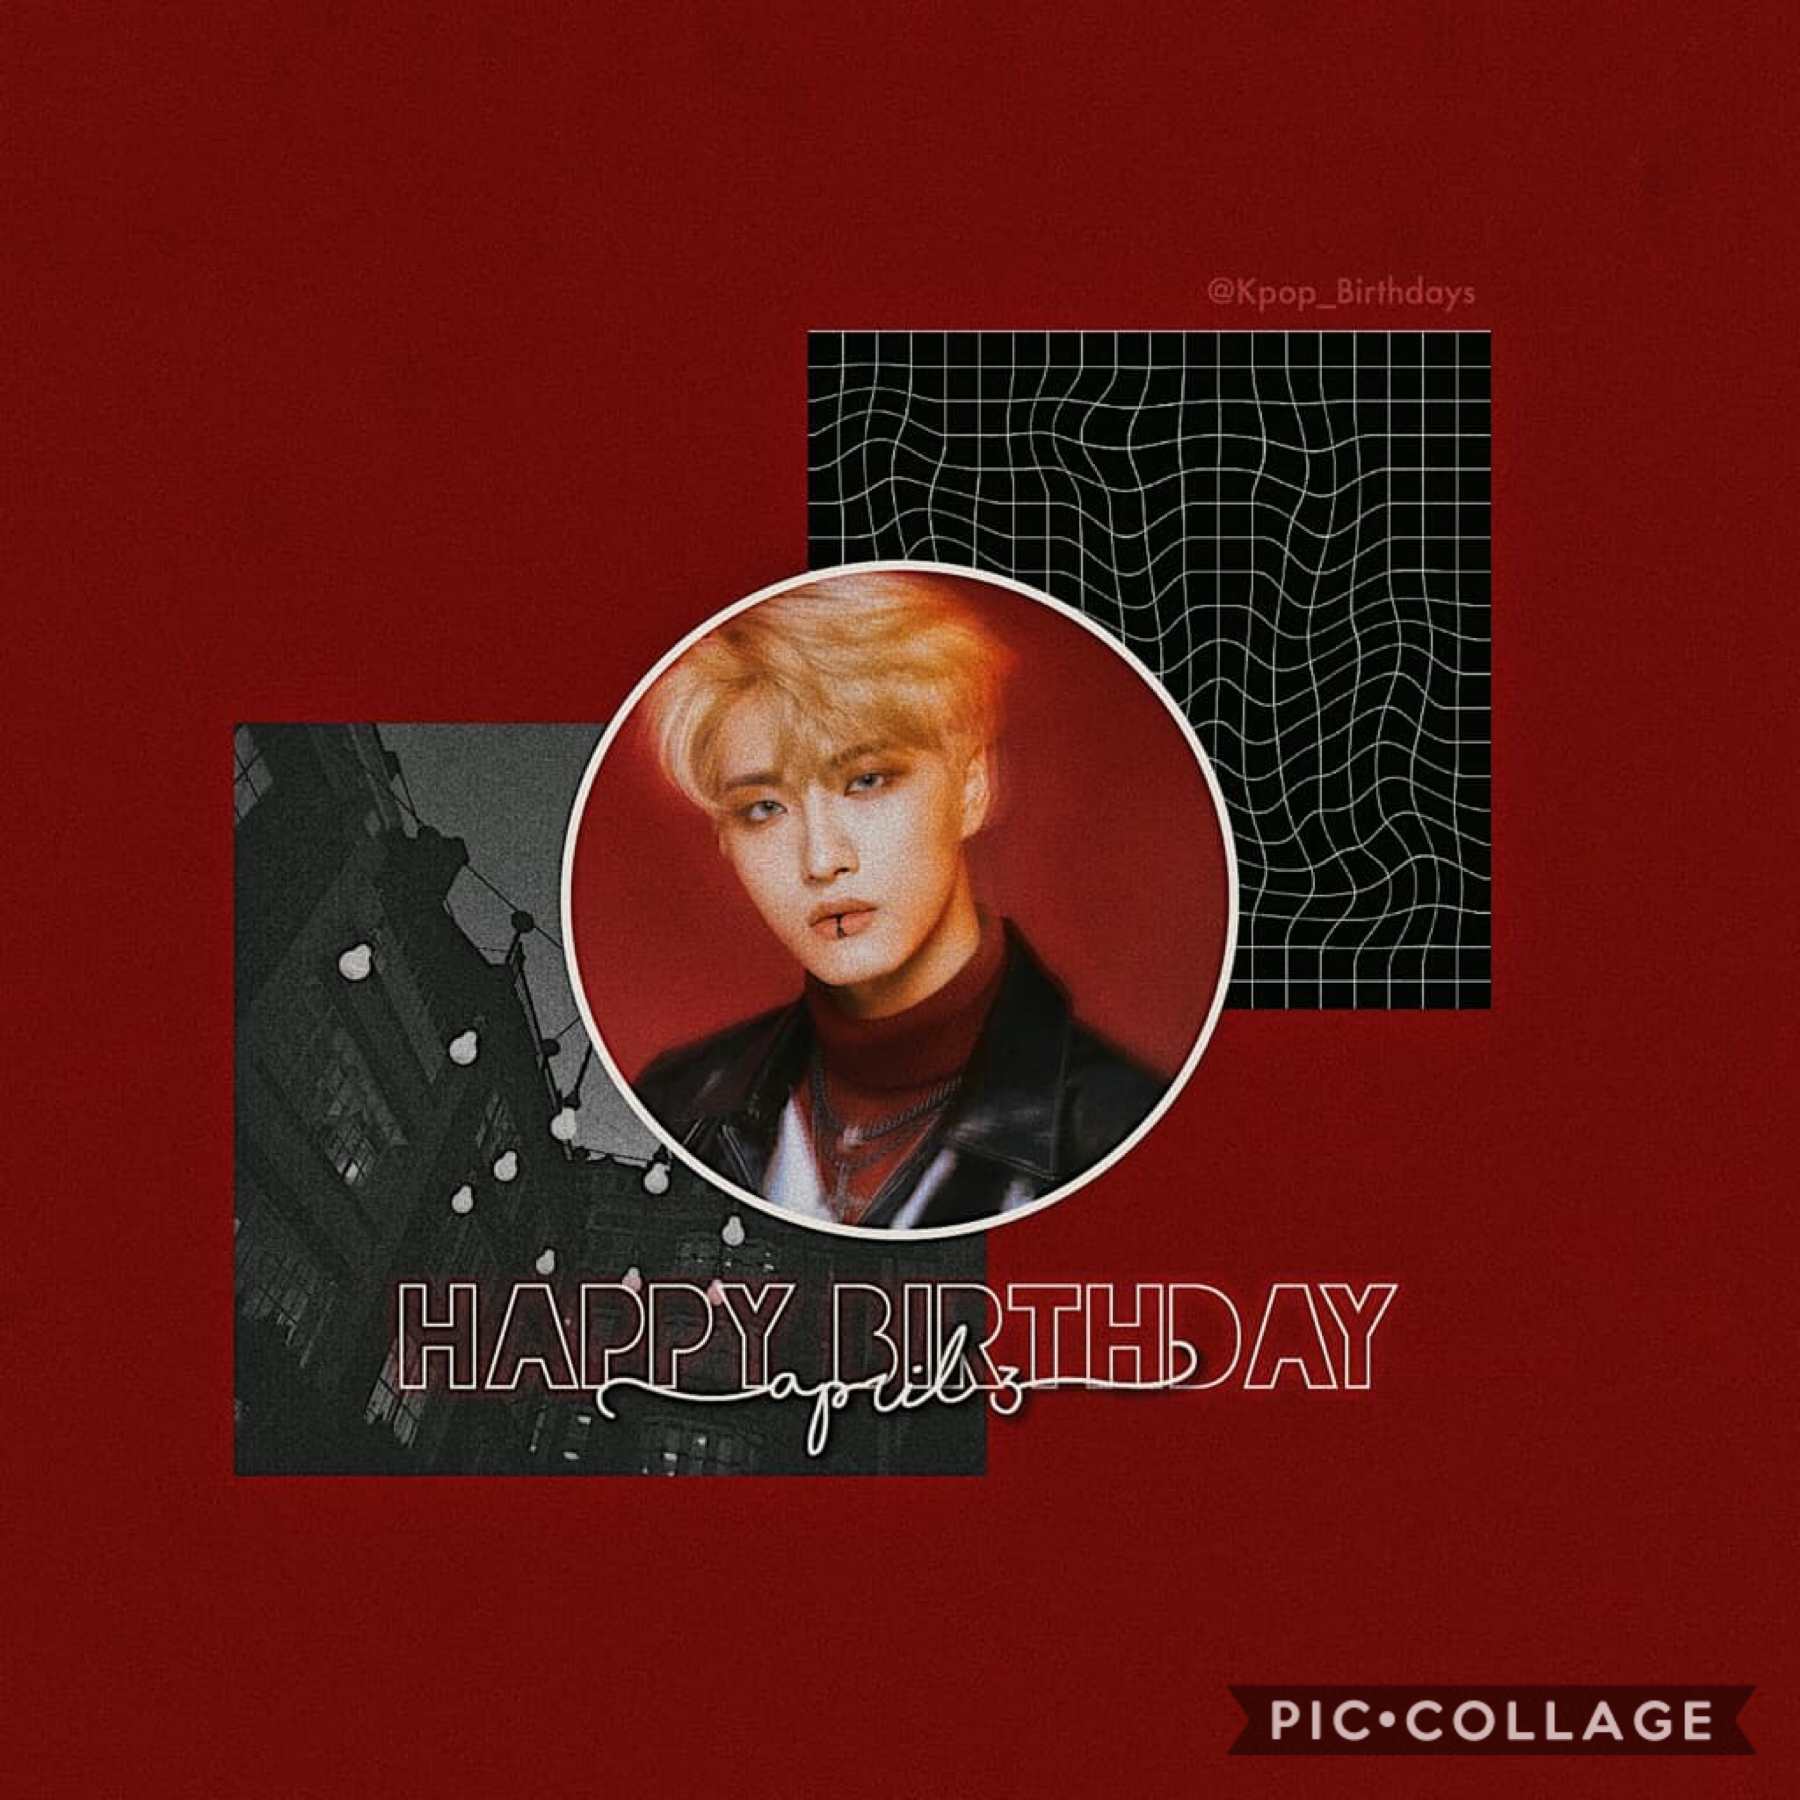 •🌷🌹•
i’m very sorry for this edit being late, but happy birthday seonghwa!!!🥳
Other birthdays:
•PRODUCE X 101’s Sejin~ April 3
•TREASURE’s Haruto~April 5
•VICTON’s Subin~ April 5
🌹🌷~Drea~🌷🌹